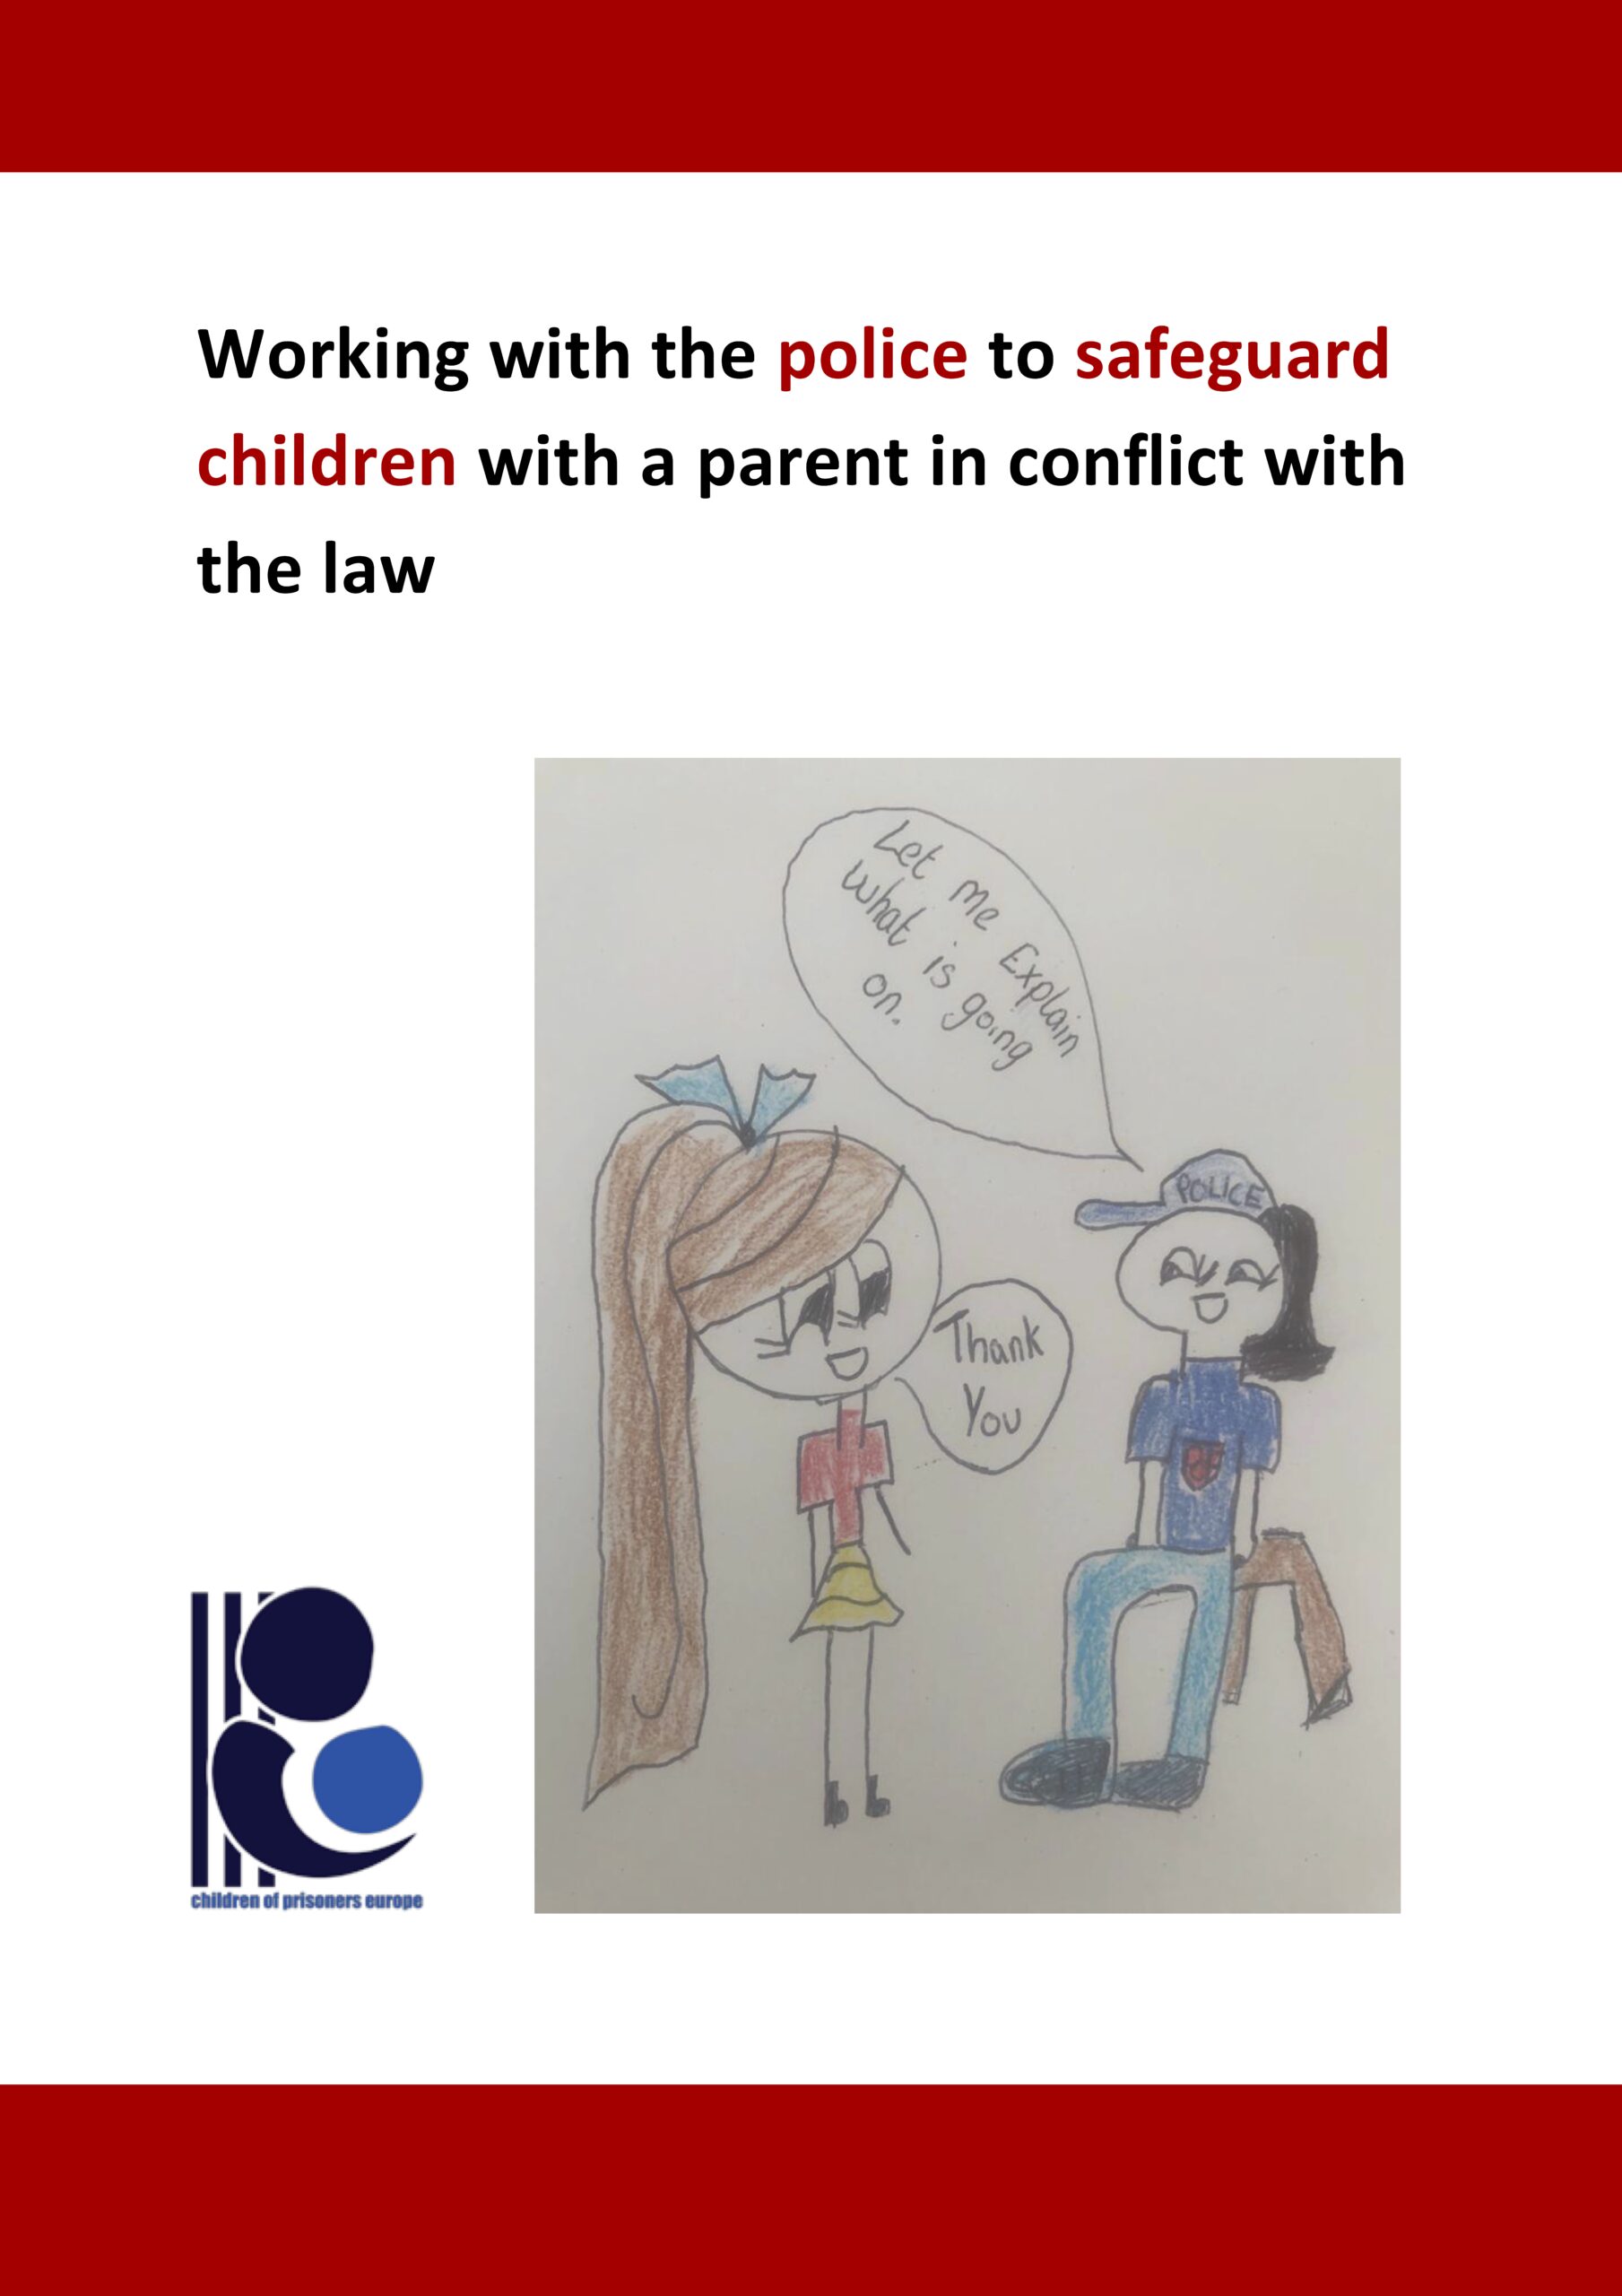 Working with the police to safeguard children with a parent in conflict with the law